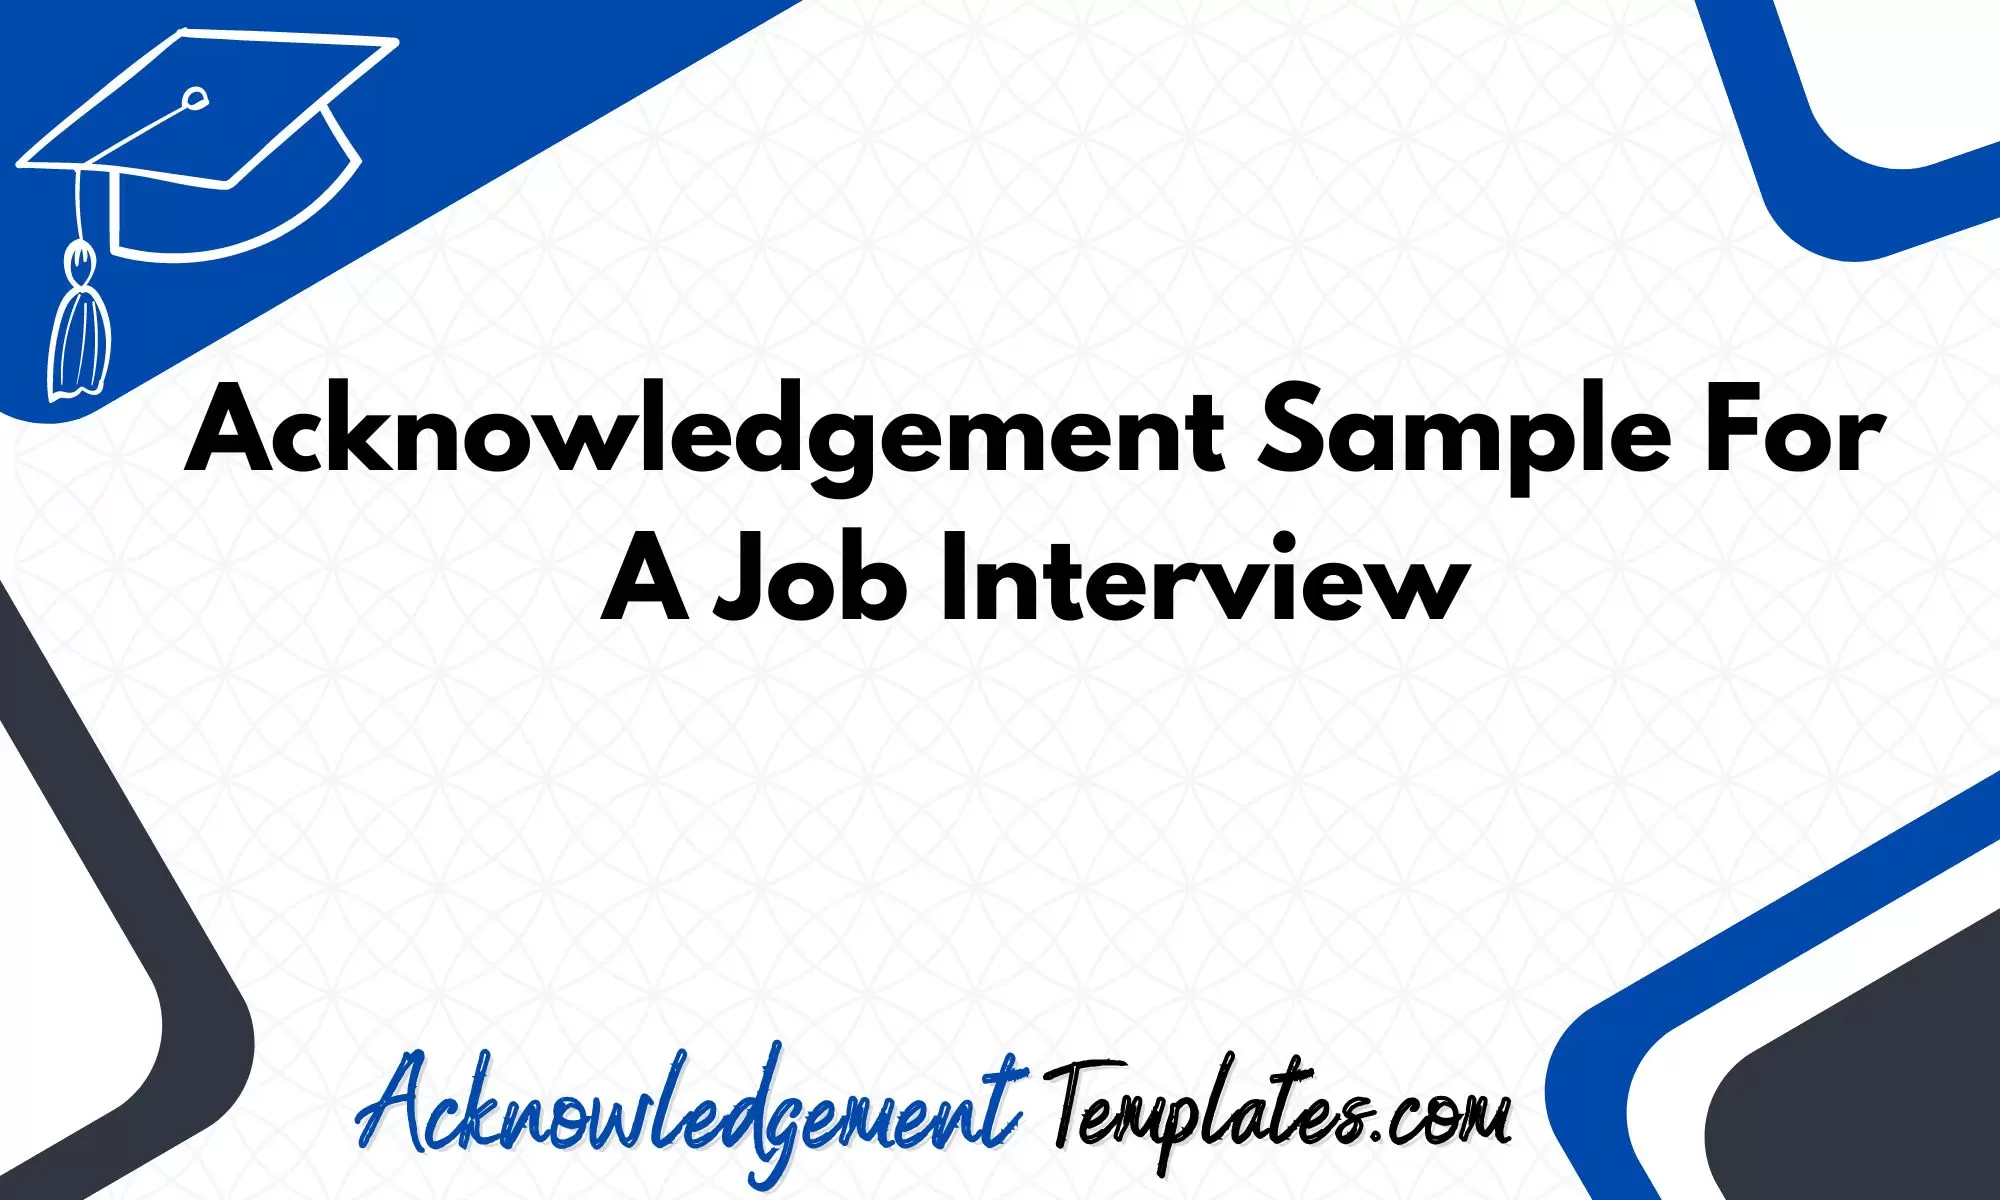 Acknowledgement sample for a job interview